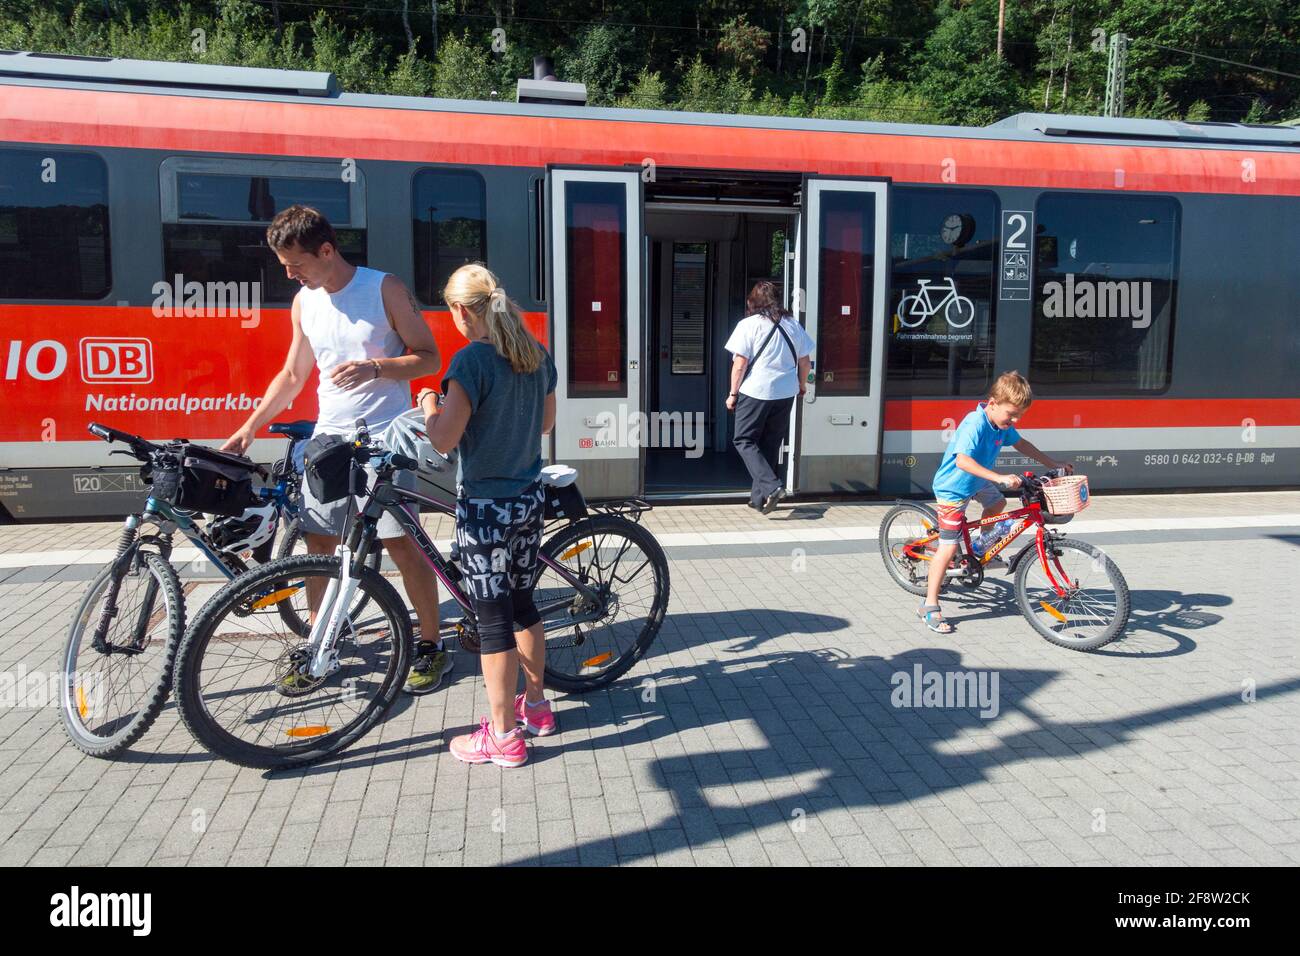 Family with bicycle traveling by regional train, man woman child Saxony Germany railway Stock Photo